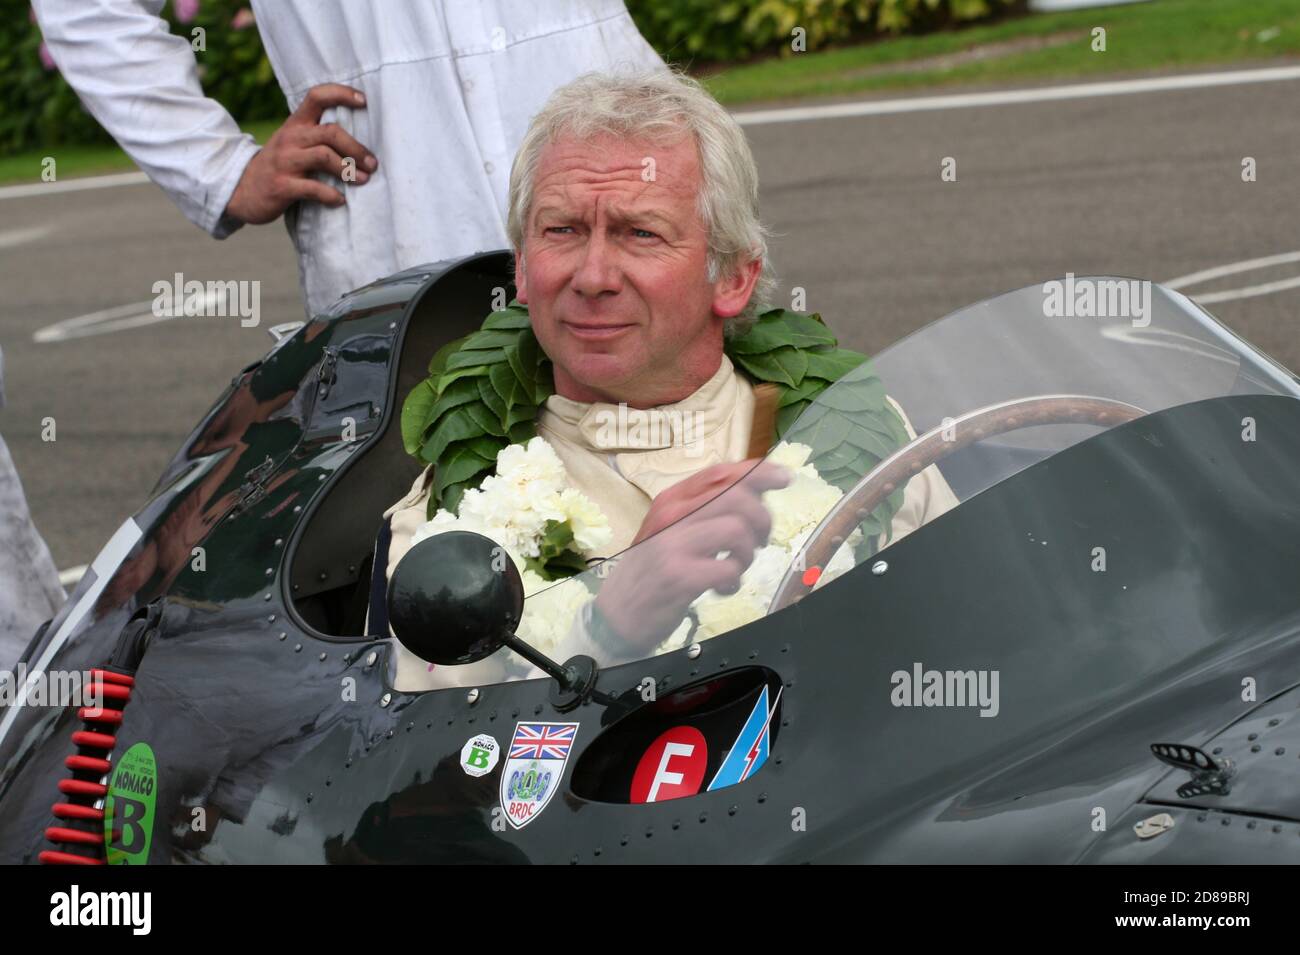 Gary Pearson, Richmond trophy winner at the 2011 Goodwood Revival Stock Photo